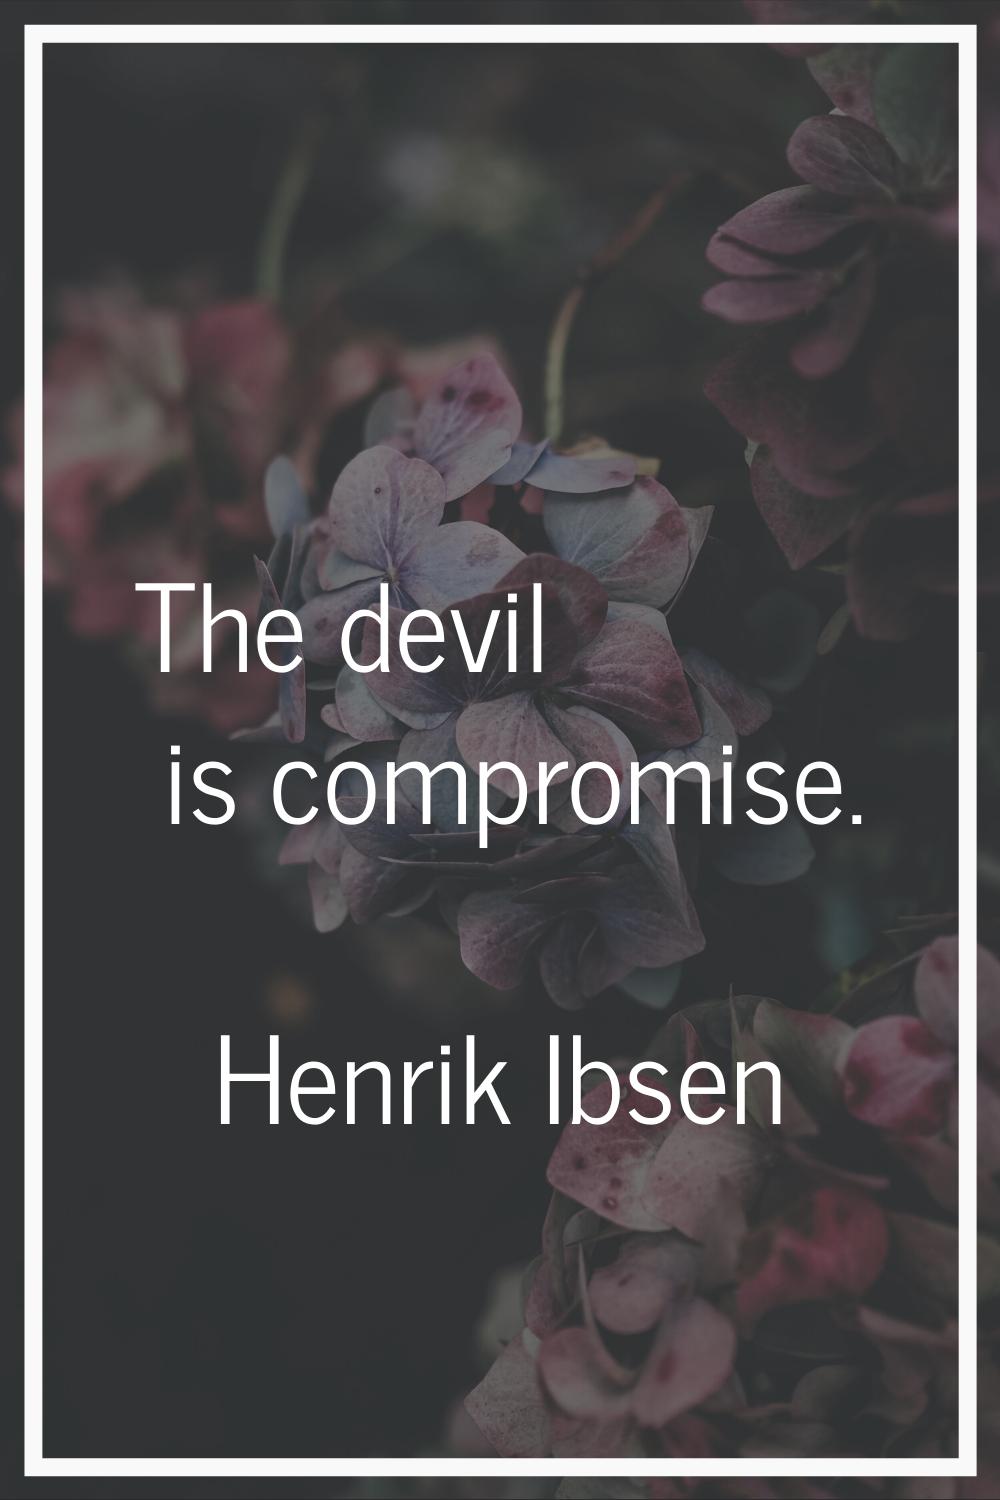 The devil is compromise.